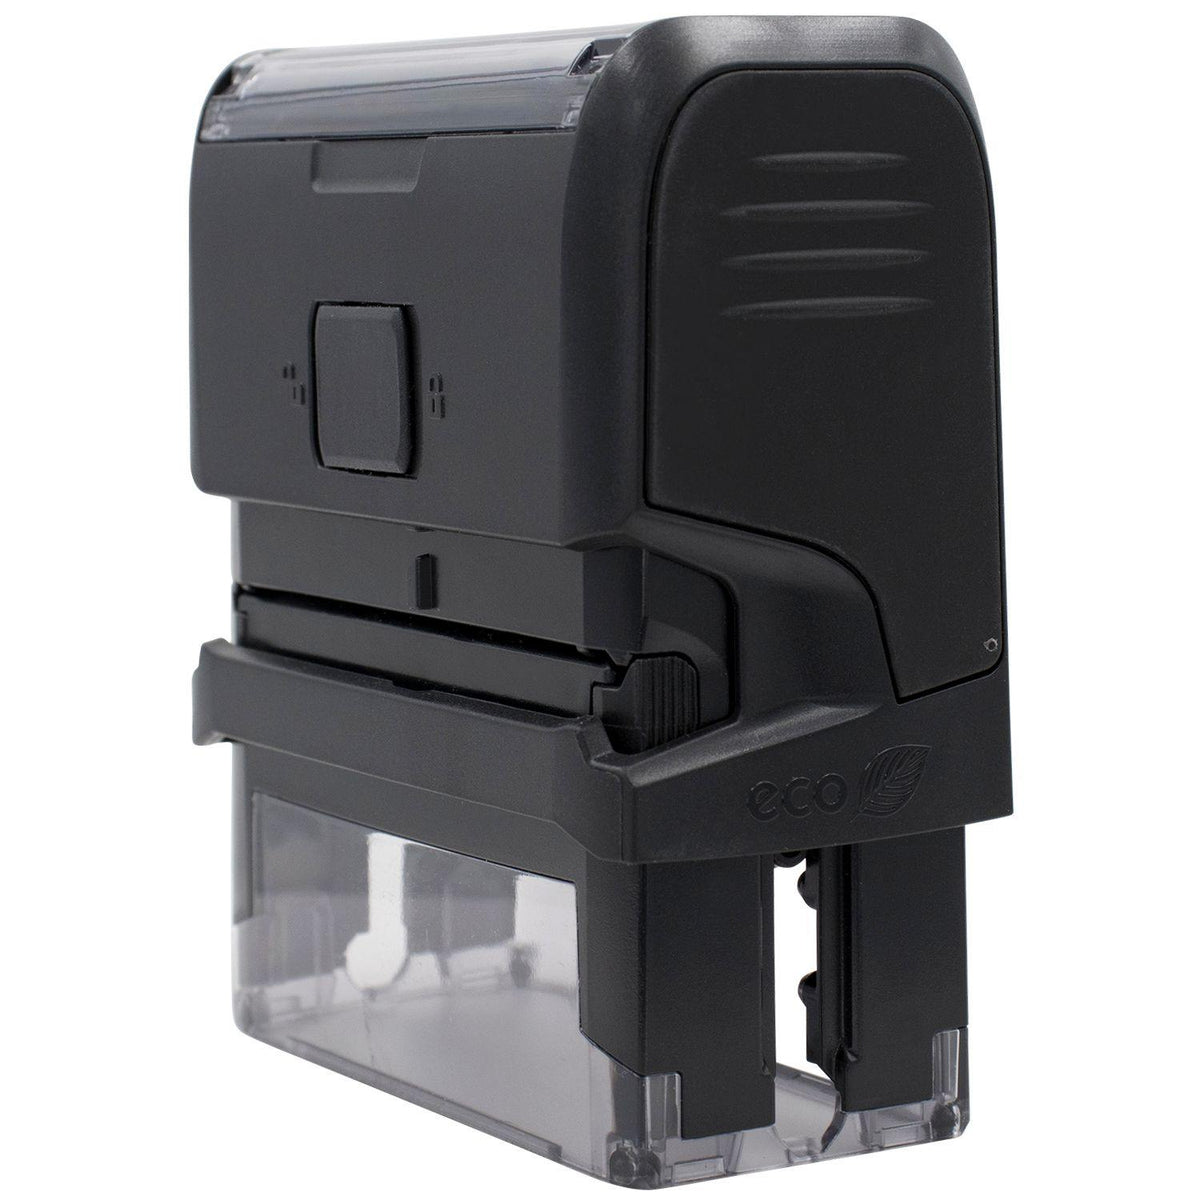 Large Self-Inking Posted with Thumbtack Stamp - Engineer Seal Stamps - Brand_Trodat, Impression Size_Large, Stamp Type_Self-Inking Stamp, Type of Use_General, Type of Use_Office